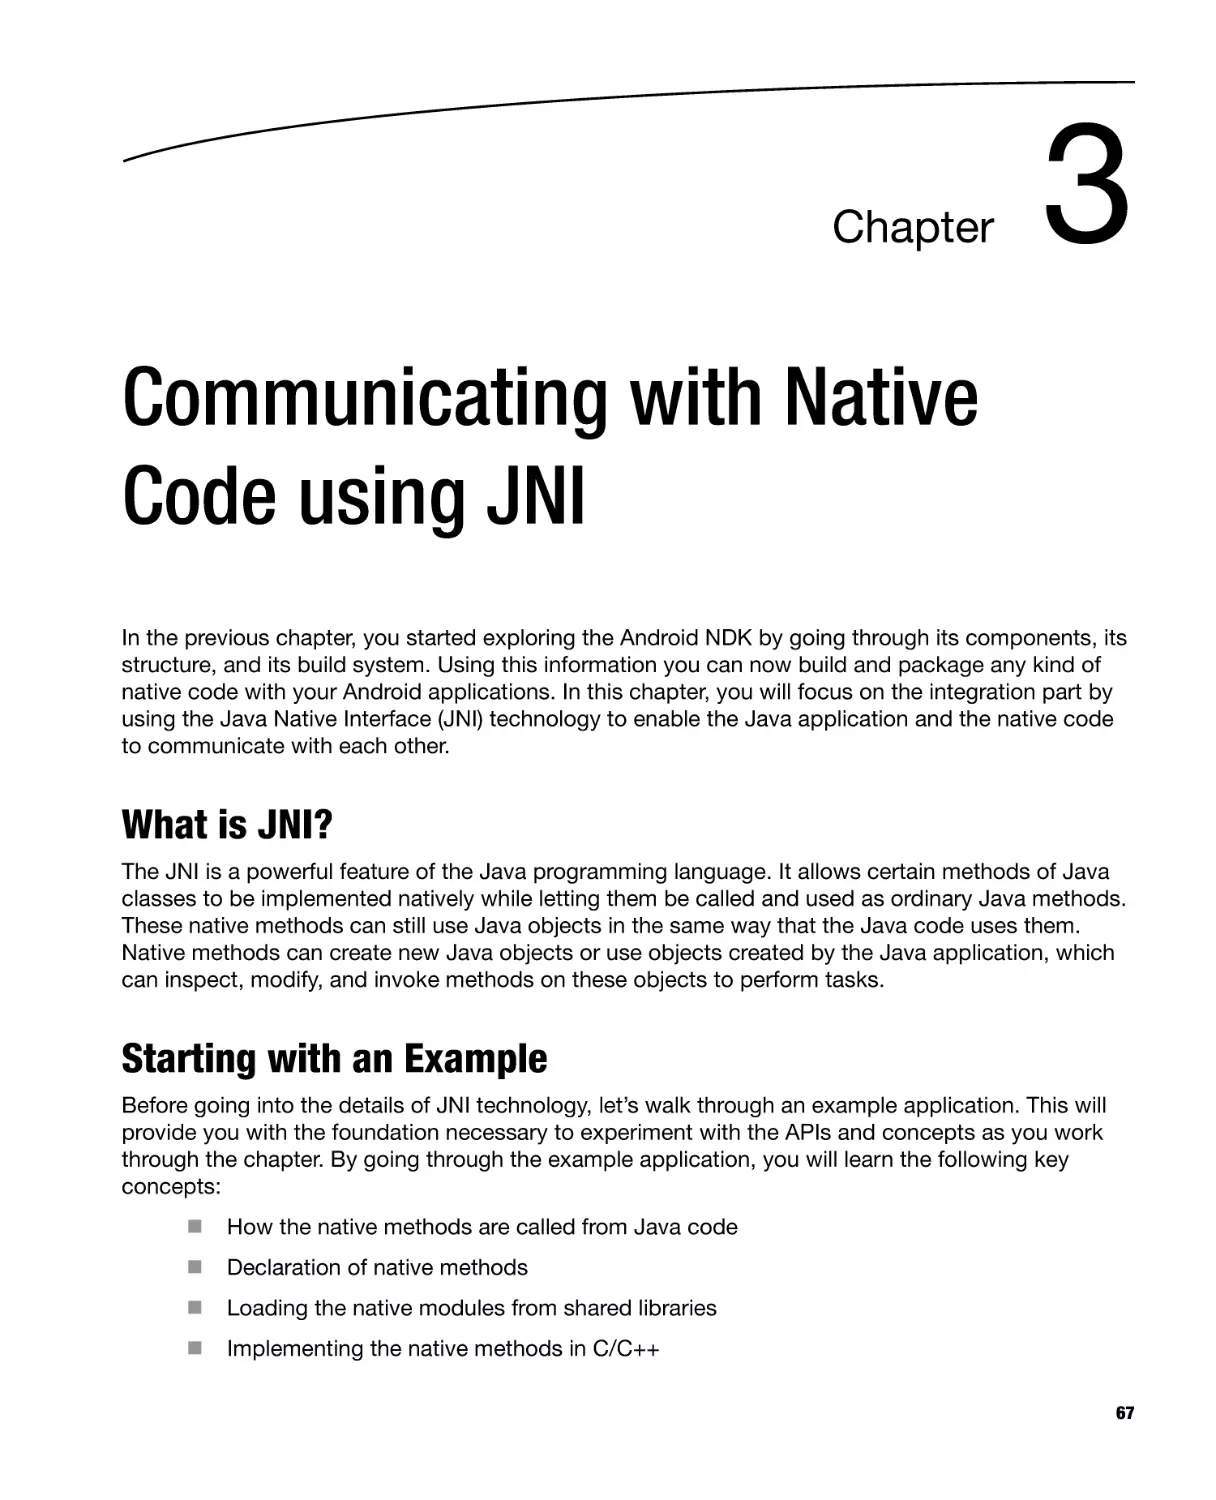 Chapter 3
What is JNI?
Starting with an Example